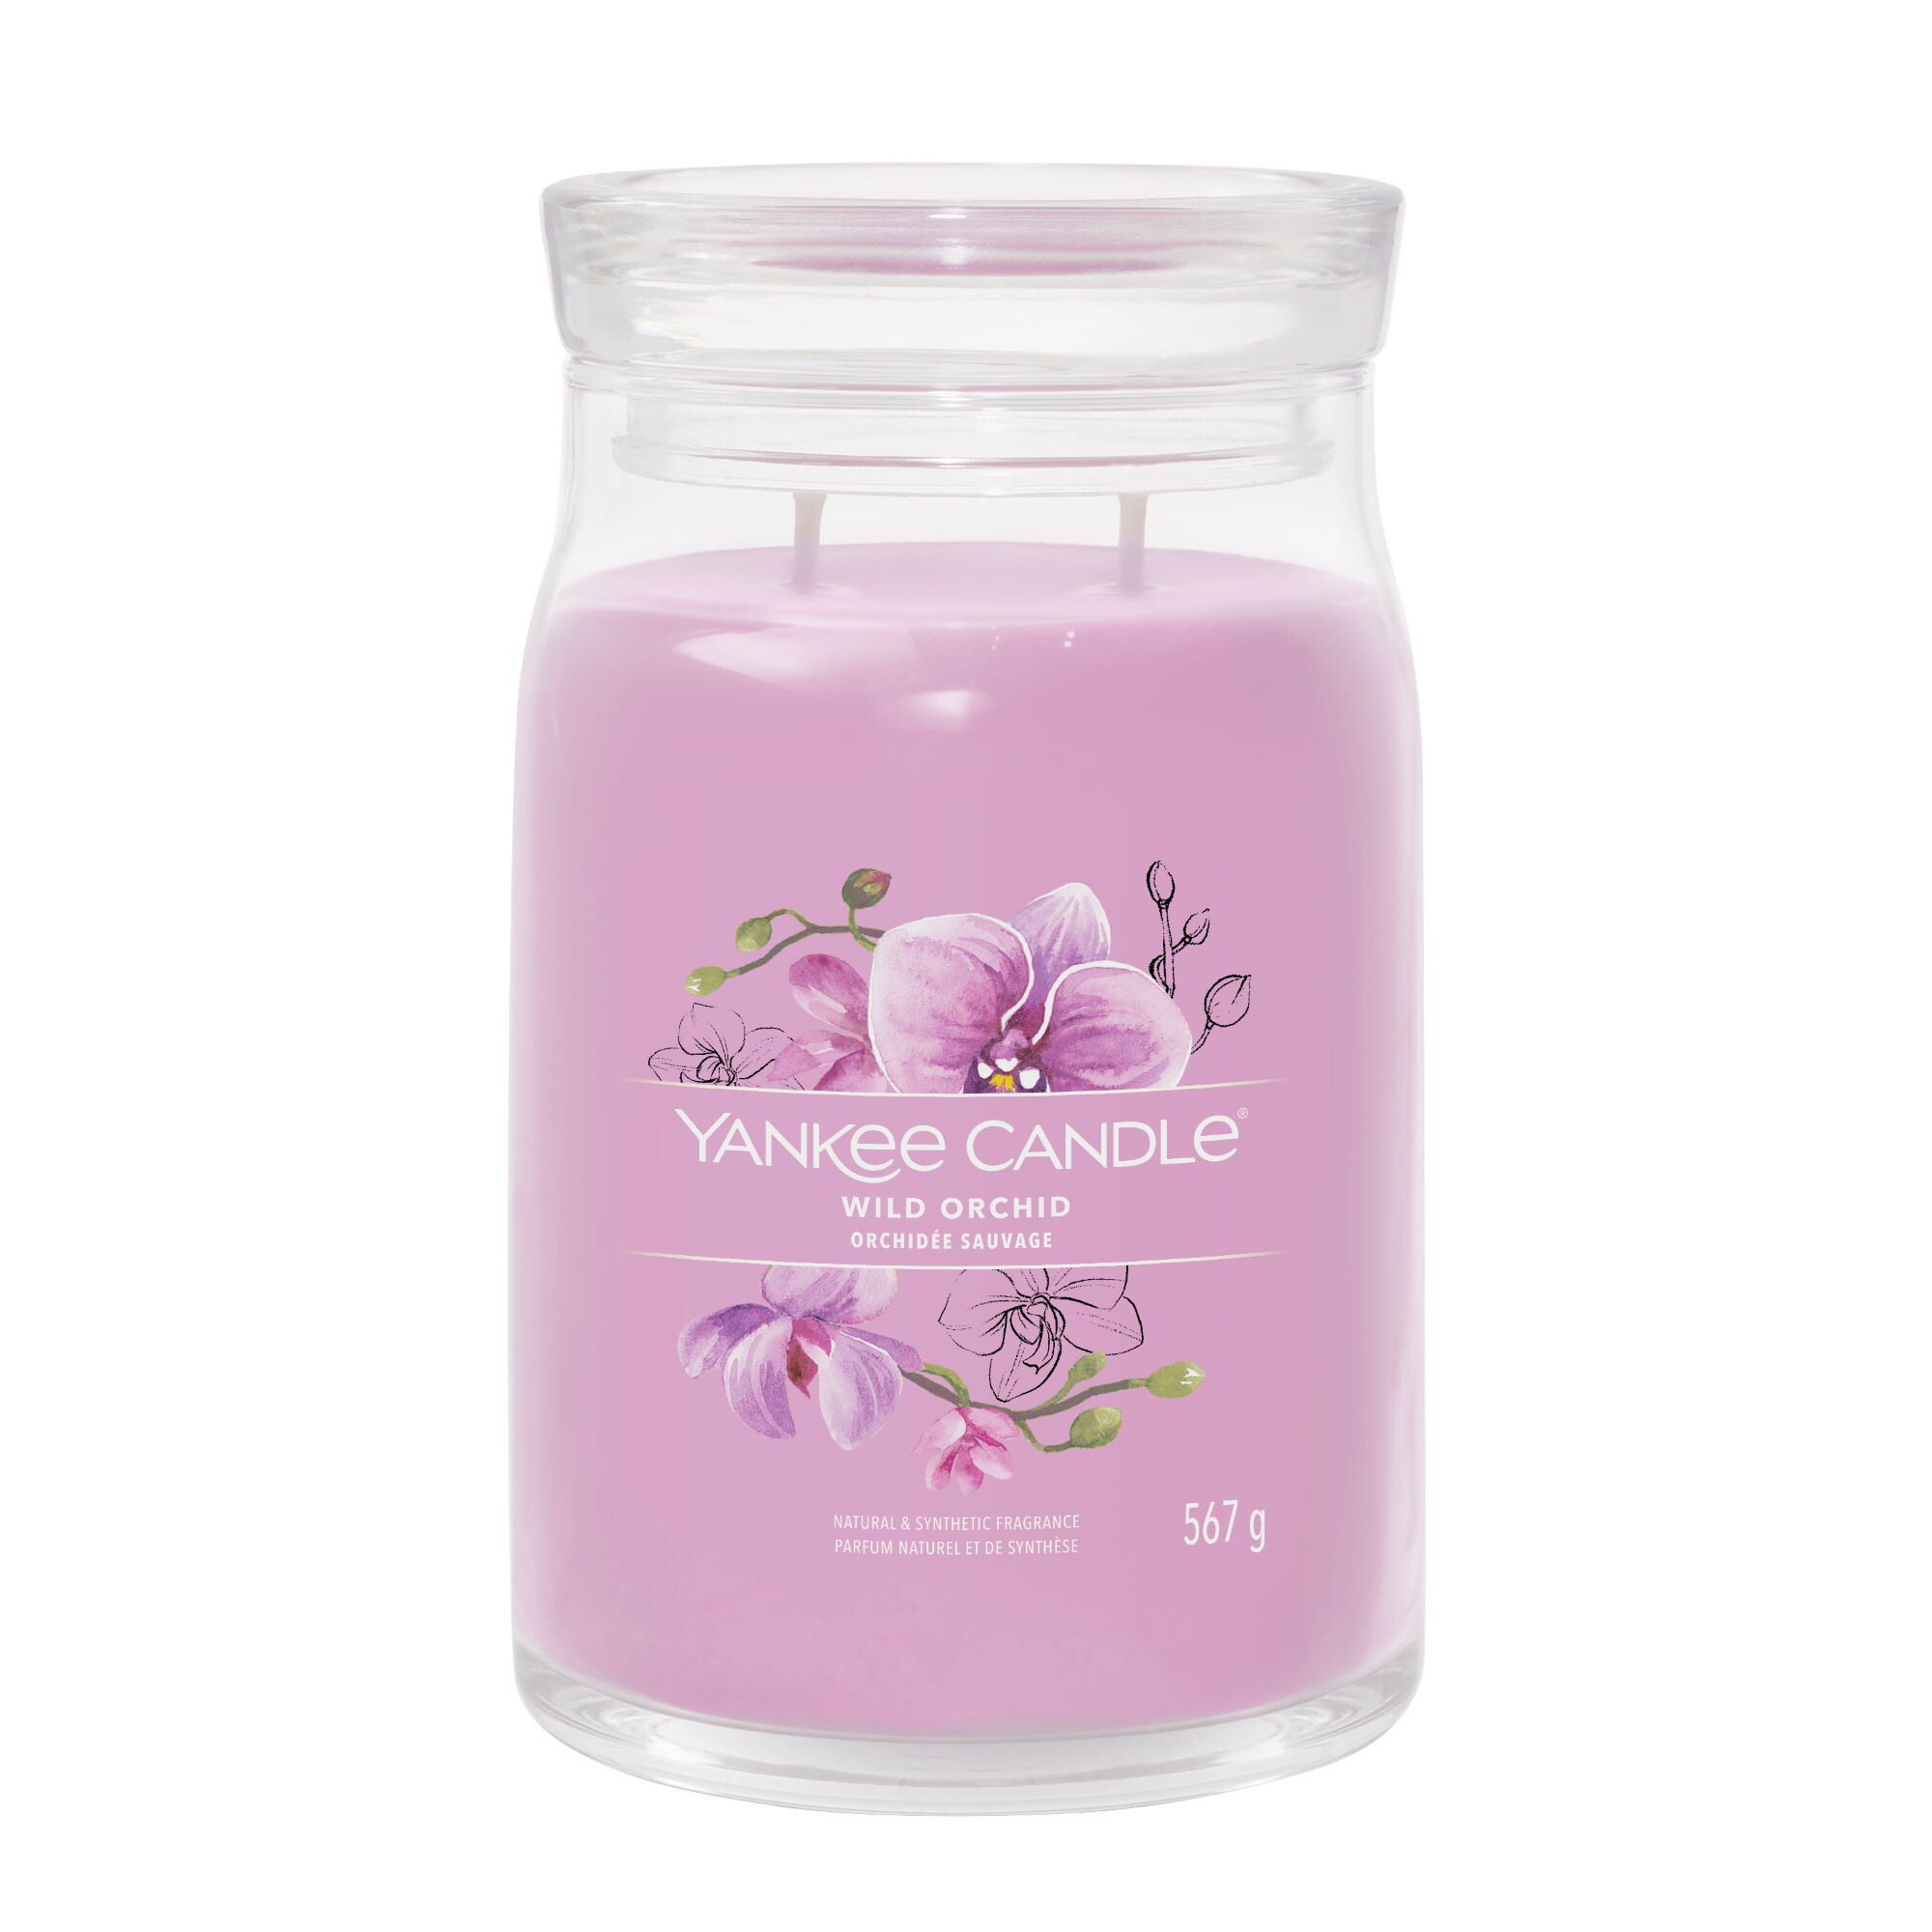 Yankee Candle Wild Orchid Signature